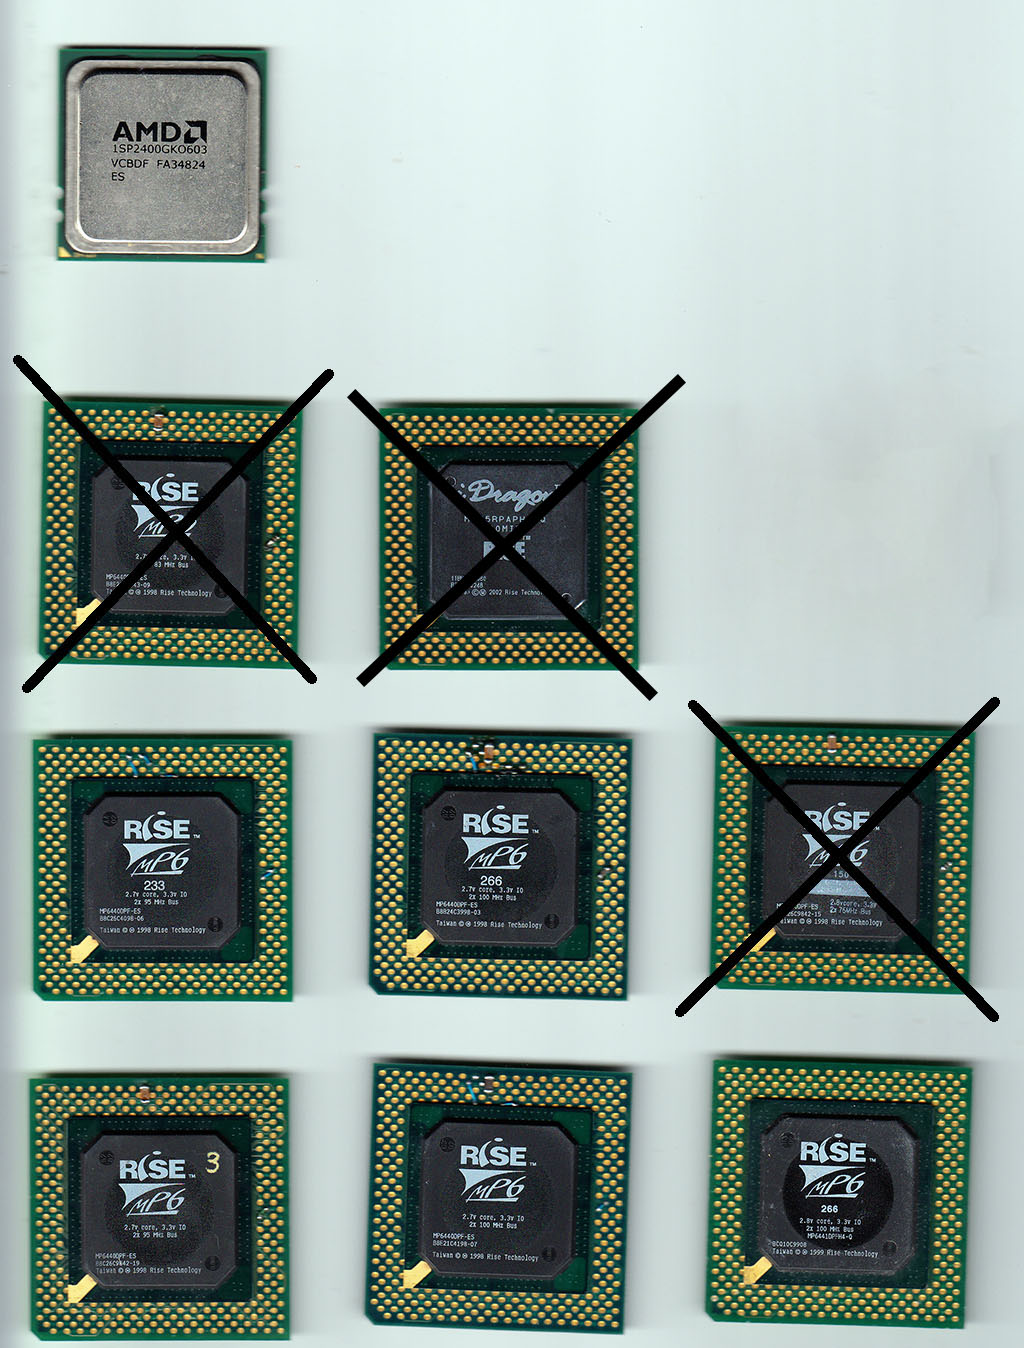 CPU-World.com forums :: View topic - Nice chips to trade